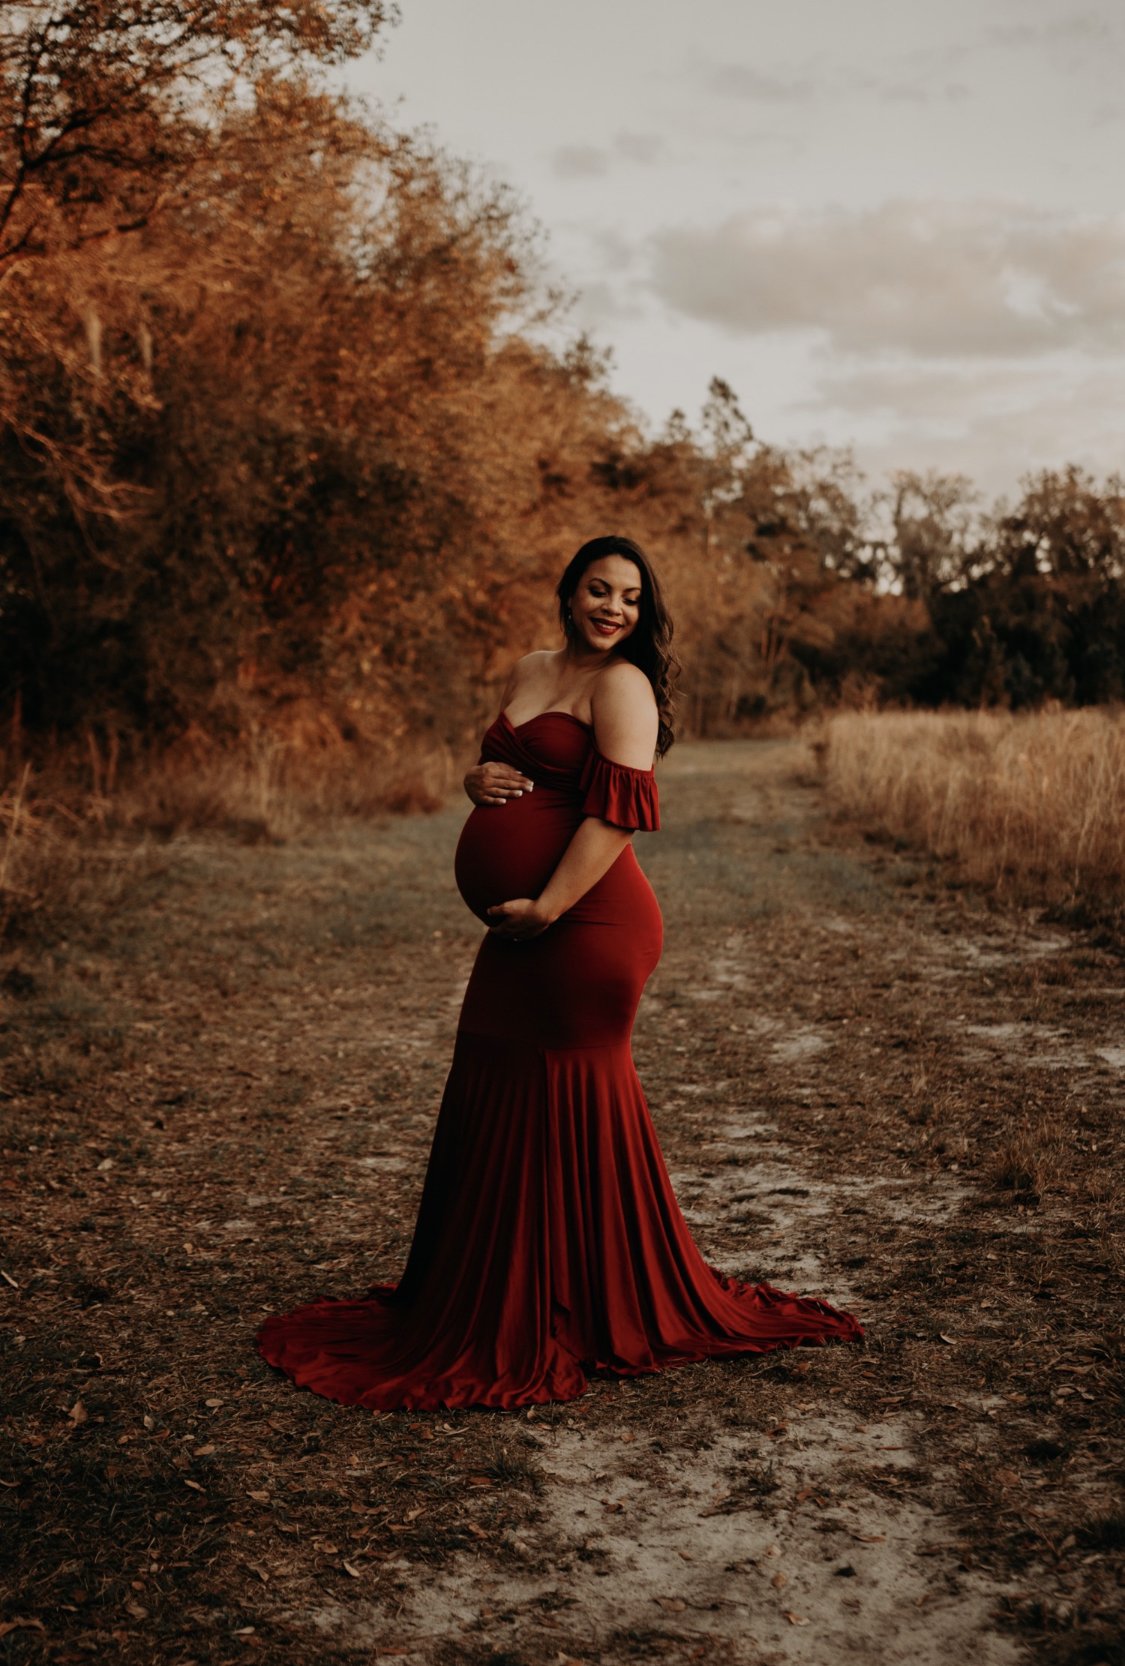 Top 5 posing ideas for maternity photography